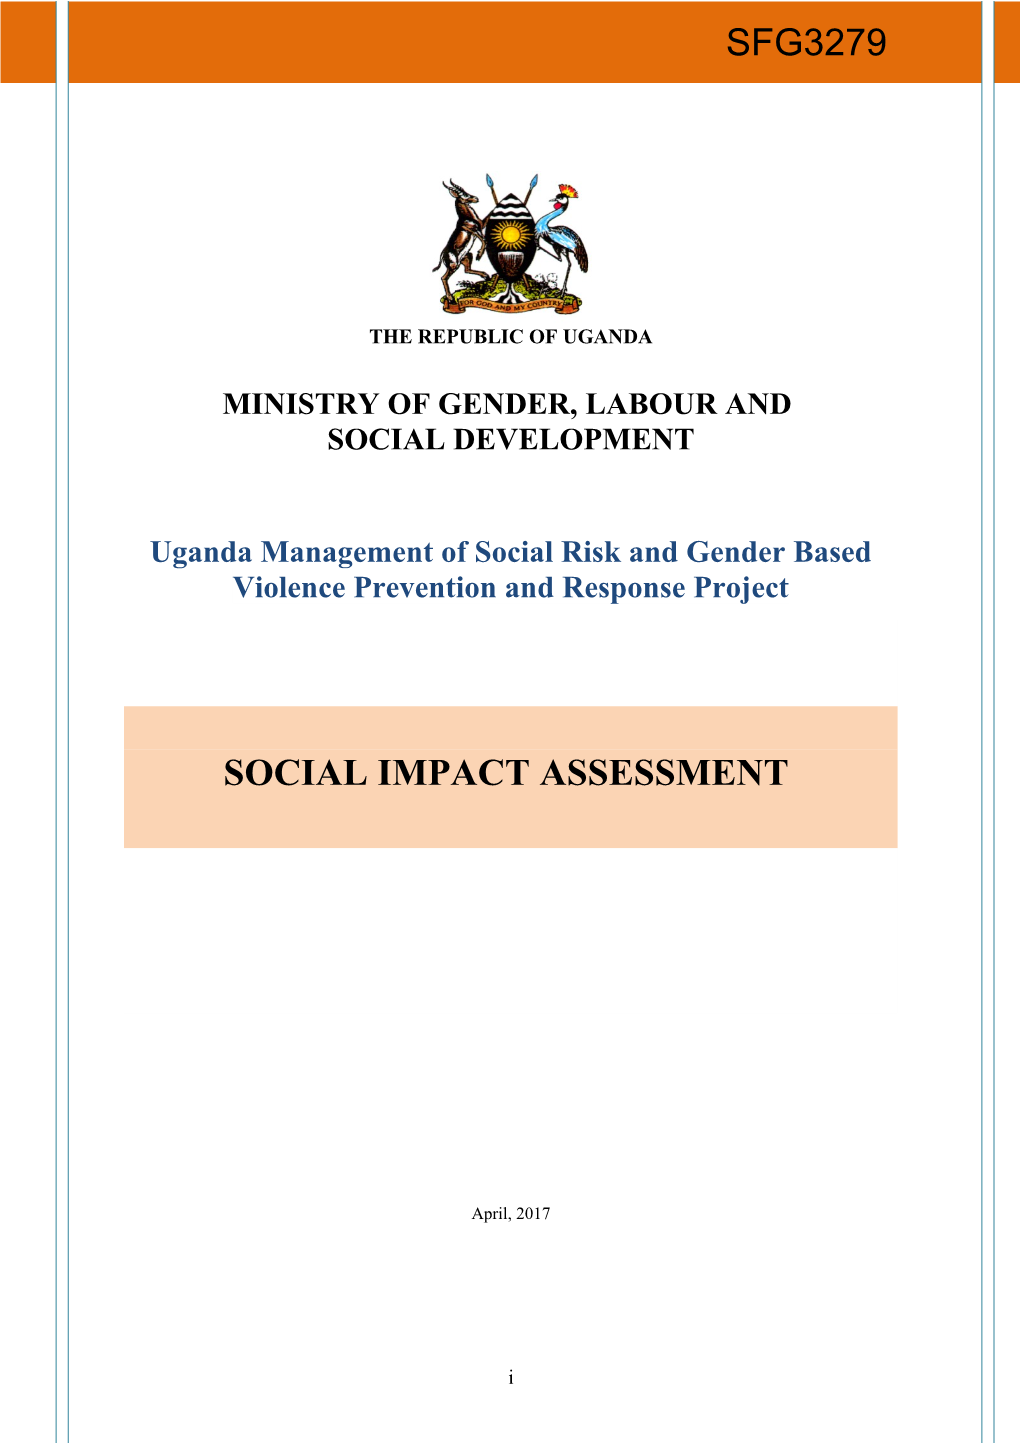 Ministry of Gender, Labour And